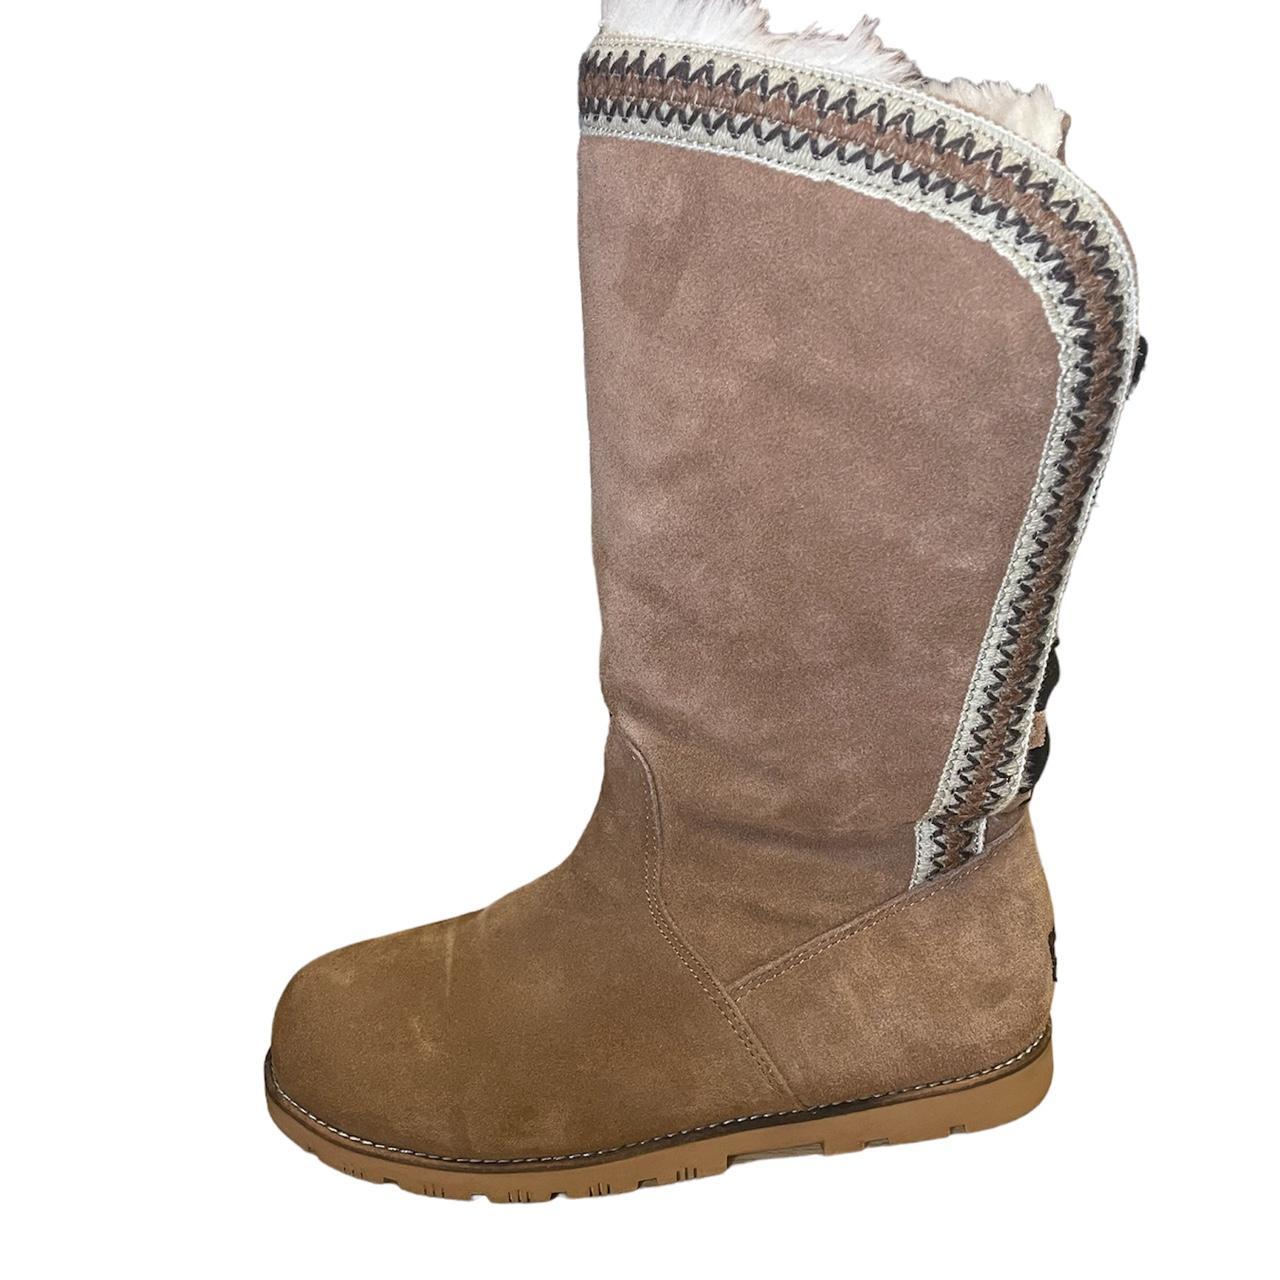 Lamo Women's Brown and White Boots (3)